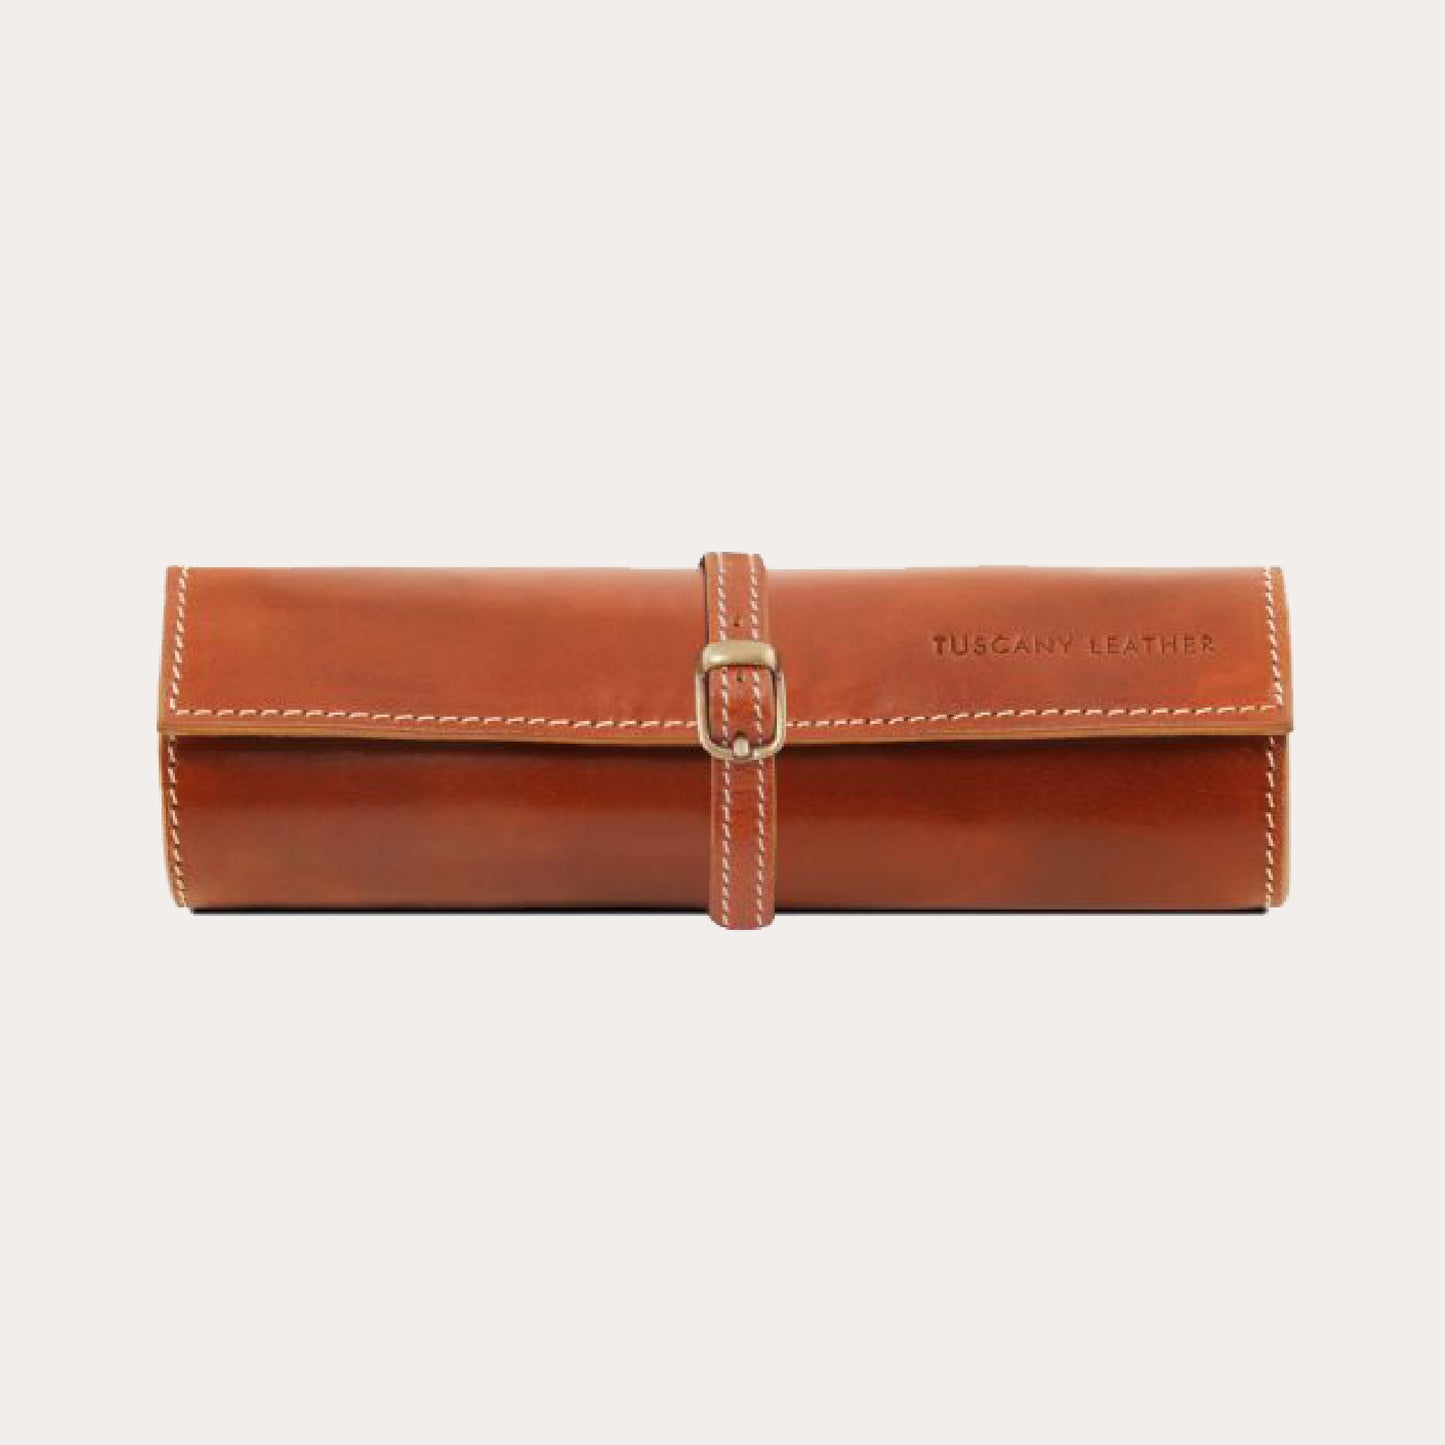 Tuscany Leather Honey Leather Jewellery Roll